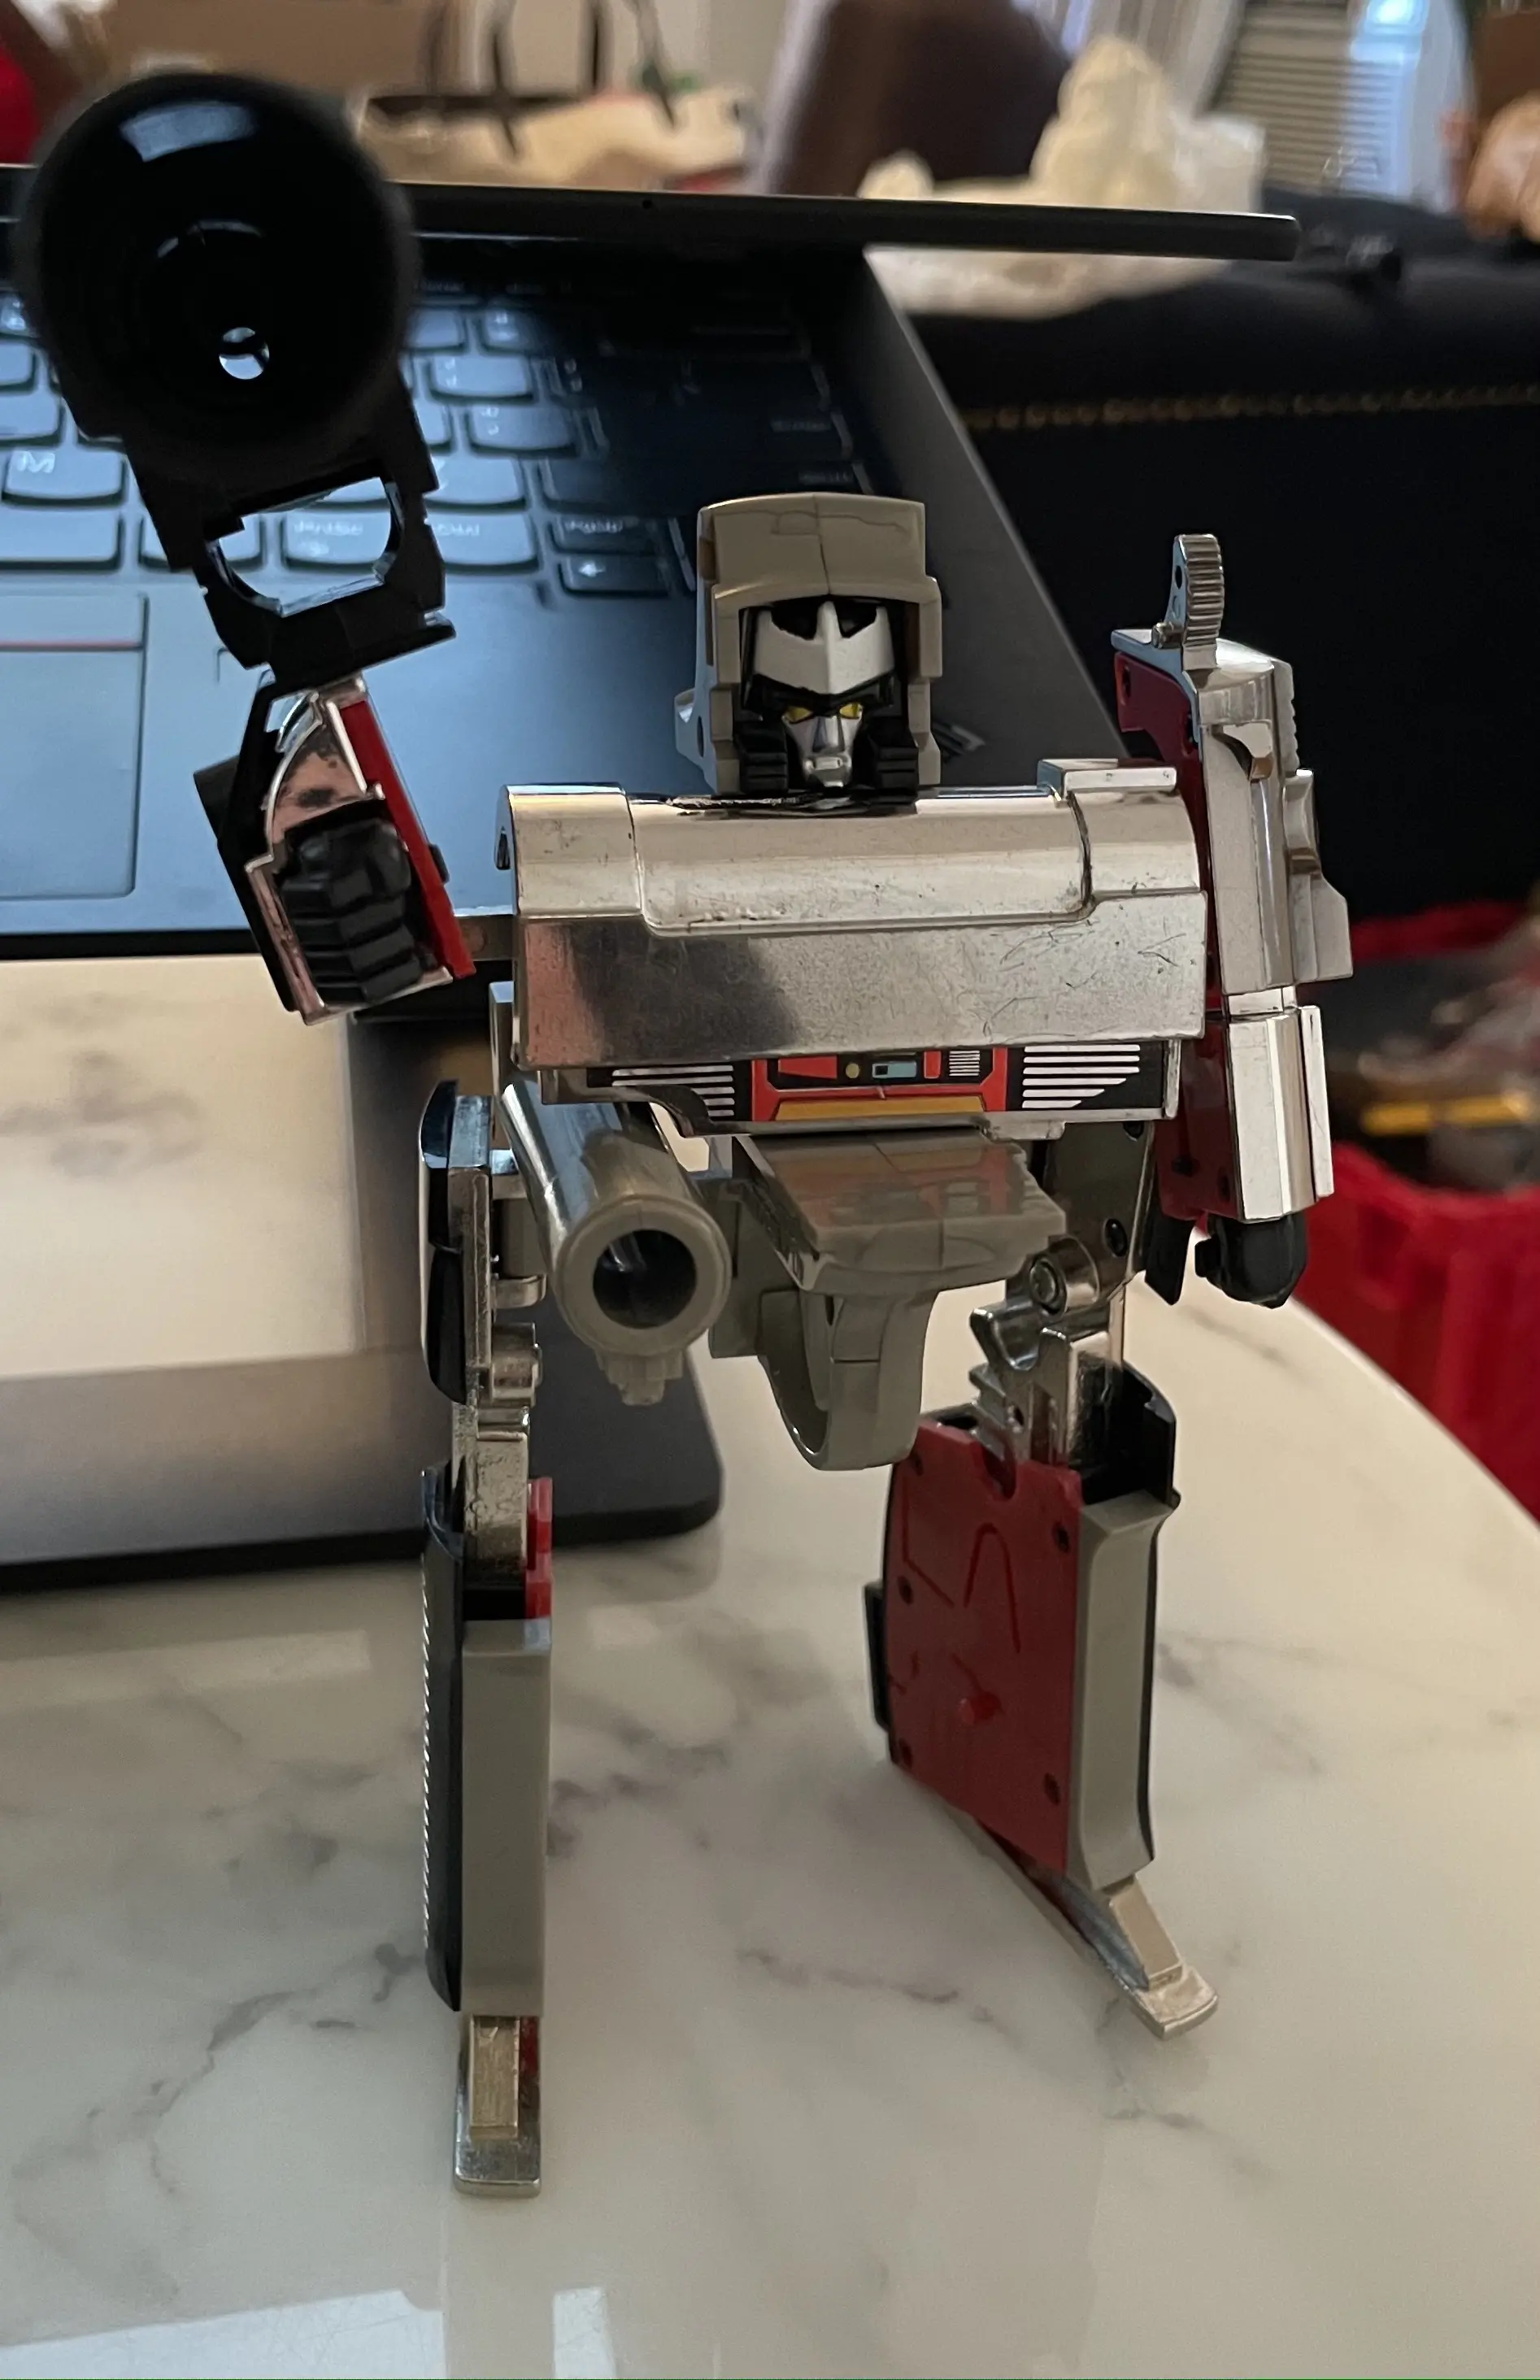 Megatron: Leader of the Decepticons